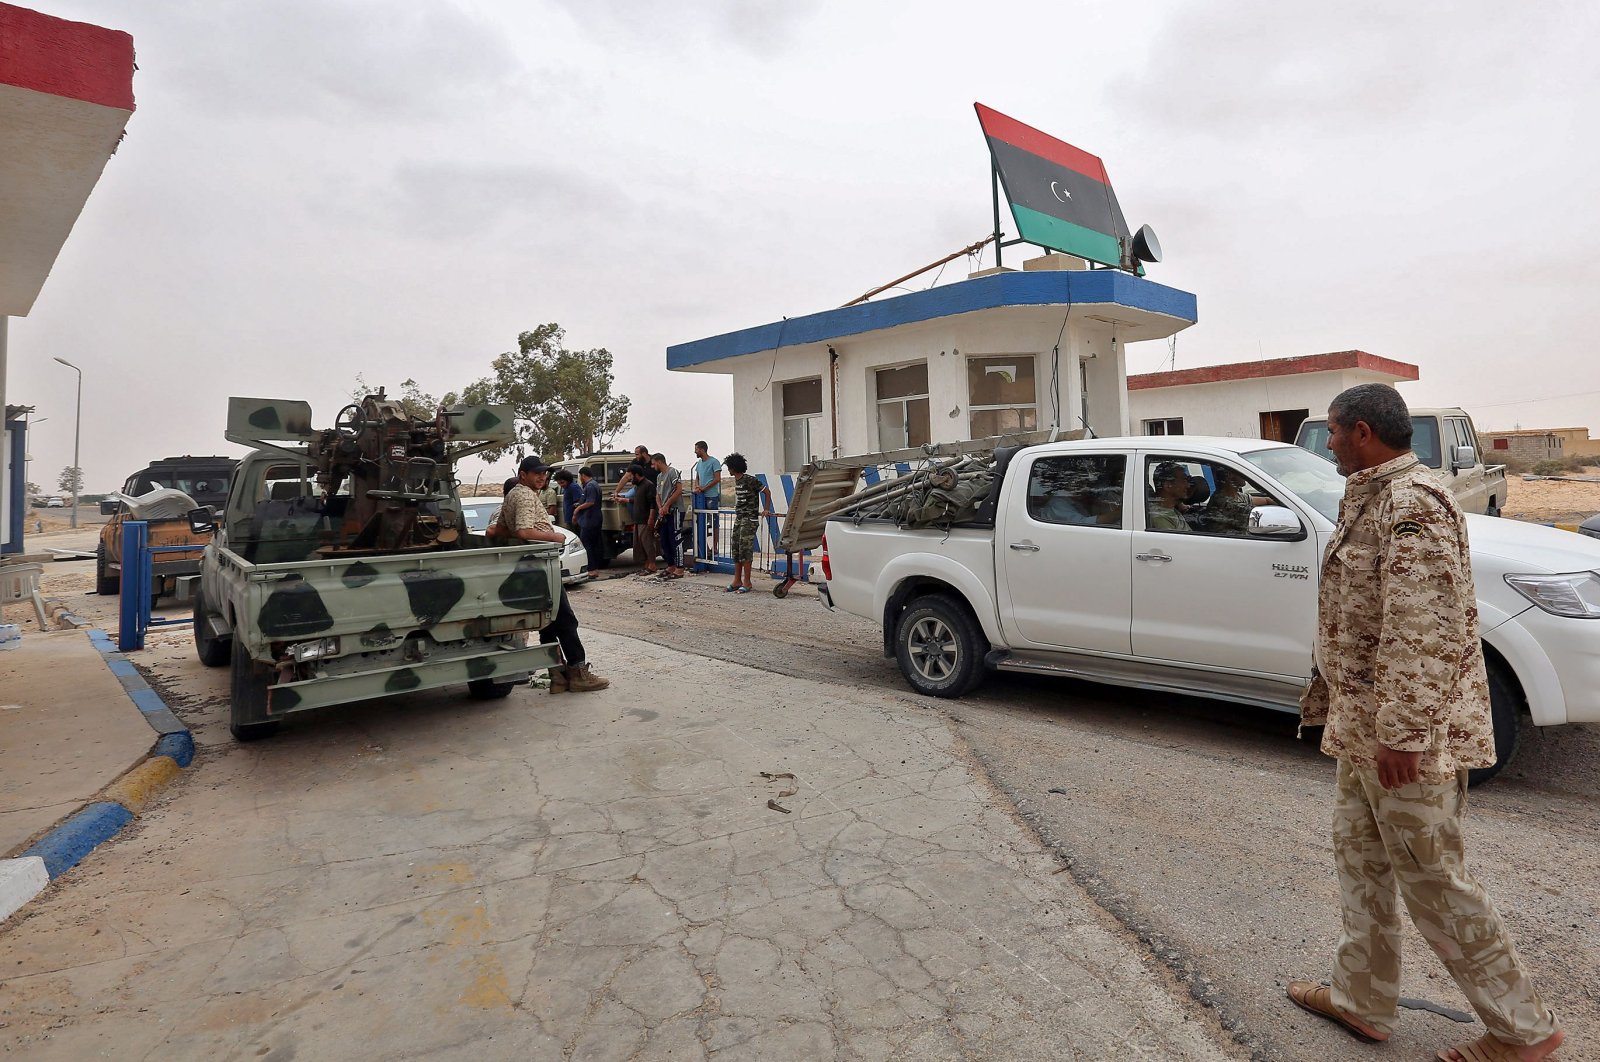 Vehicles of forces loyal to Libya's U.N.-recognized Government of National Accord (GNA) are seen outside a checkpoint at al-Watiya airbase, which they seized control of, southwest of the capital Tripoli, May 18, 2020. (AFP Photo)